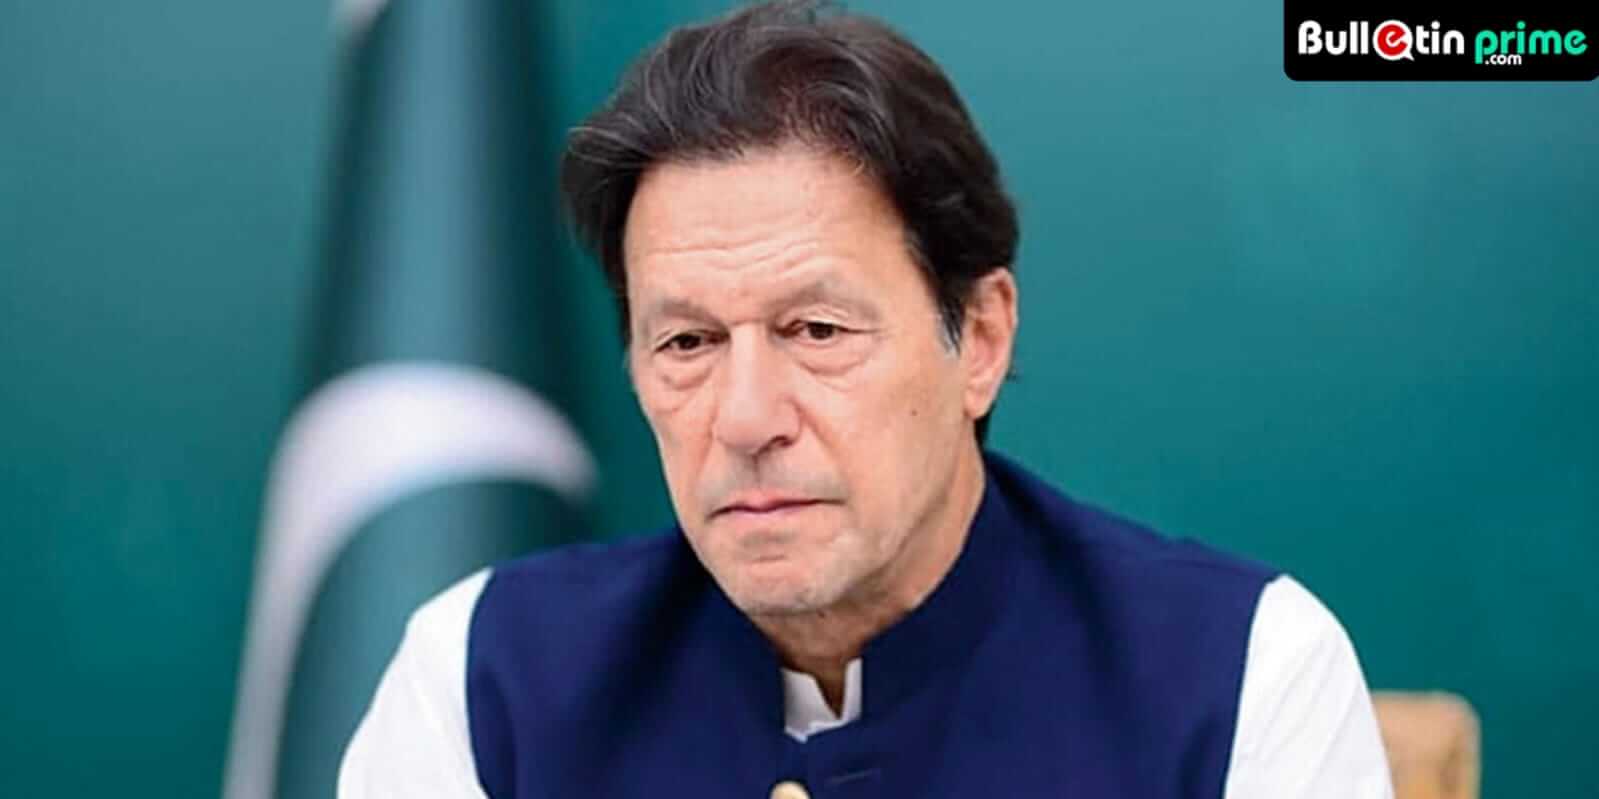 Imran Khan wants to see strong links between Pakistan and India